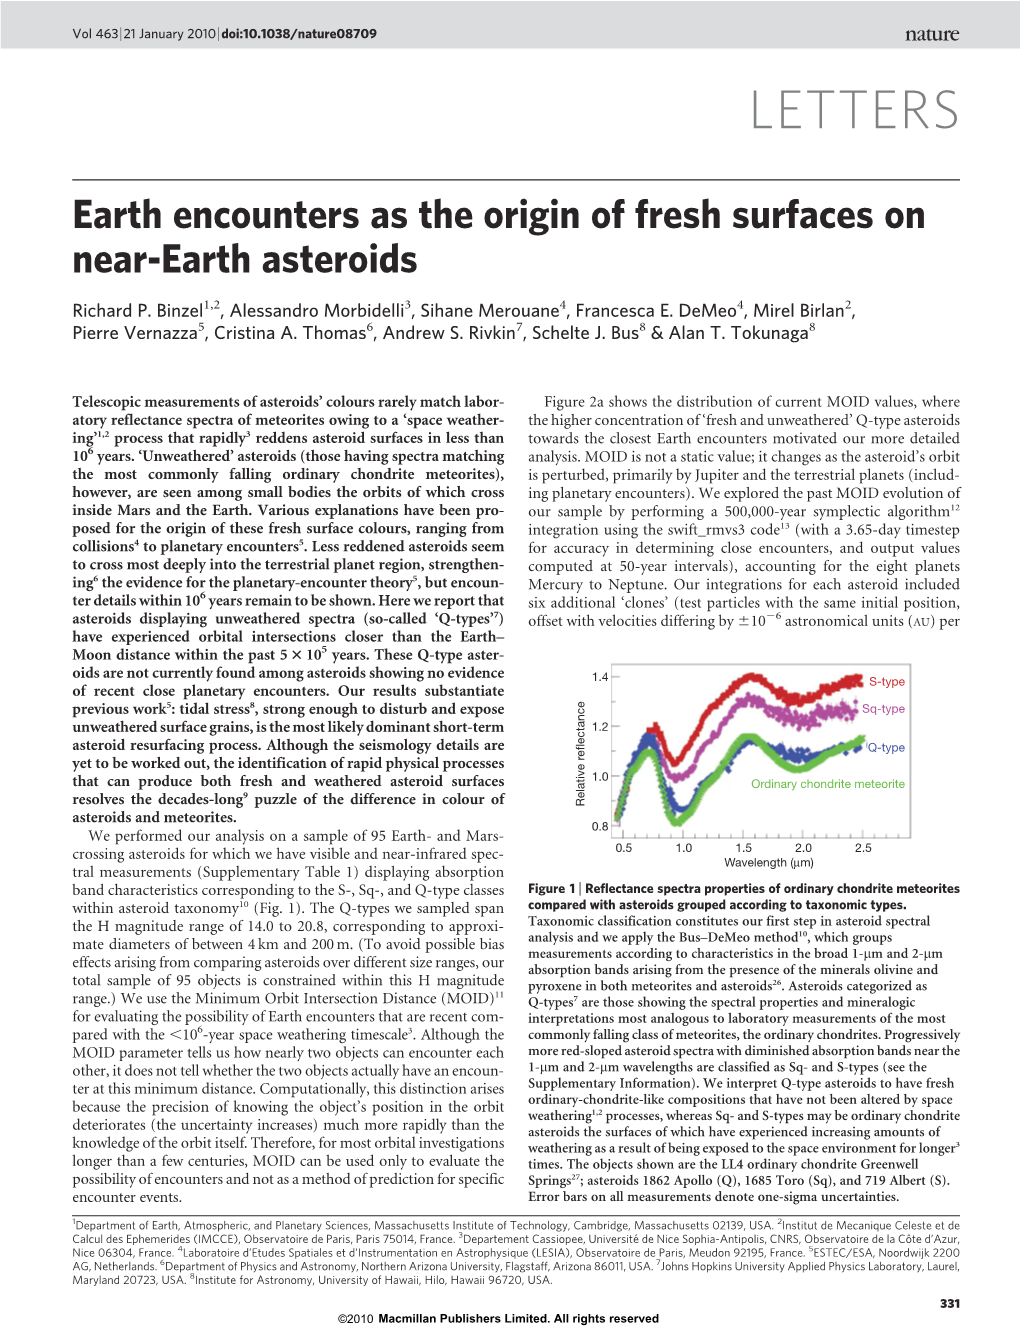 Earth Encounters As the Origin of Fresh Surfaces on Near-Earth Asteroids